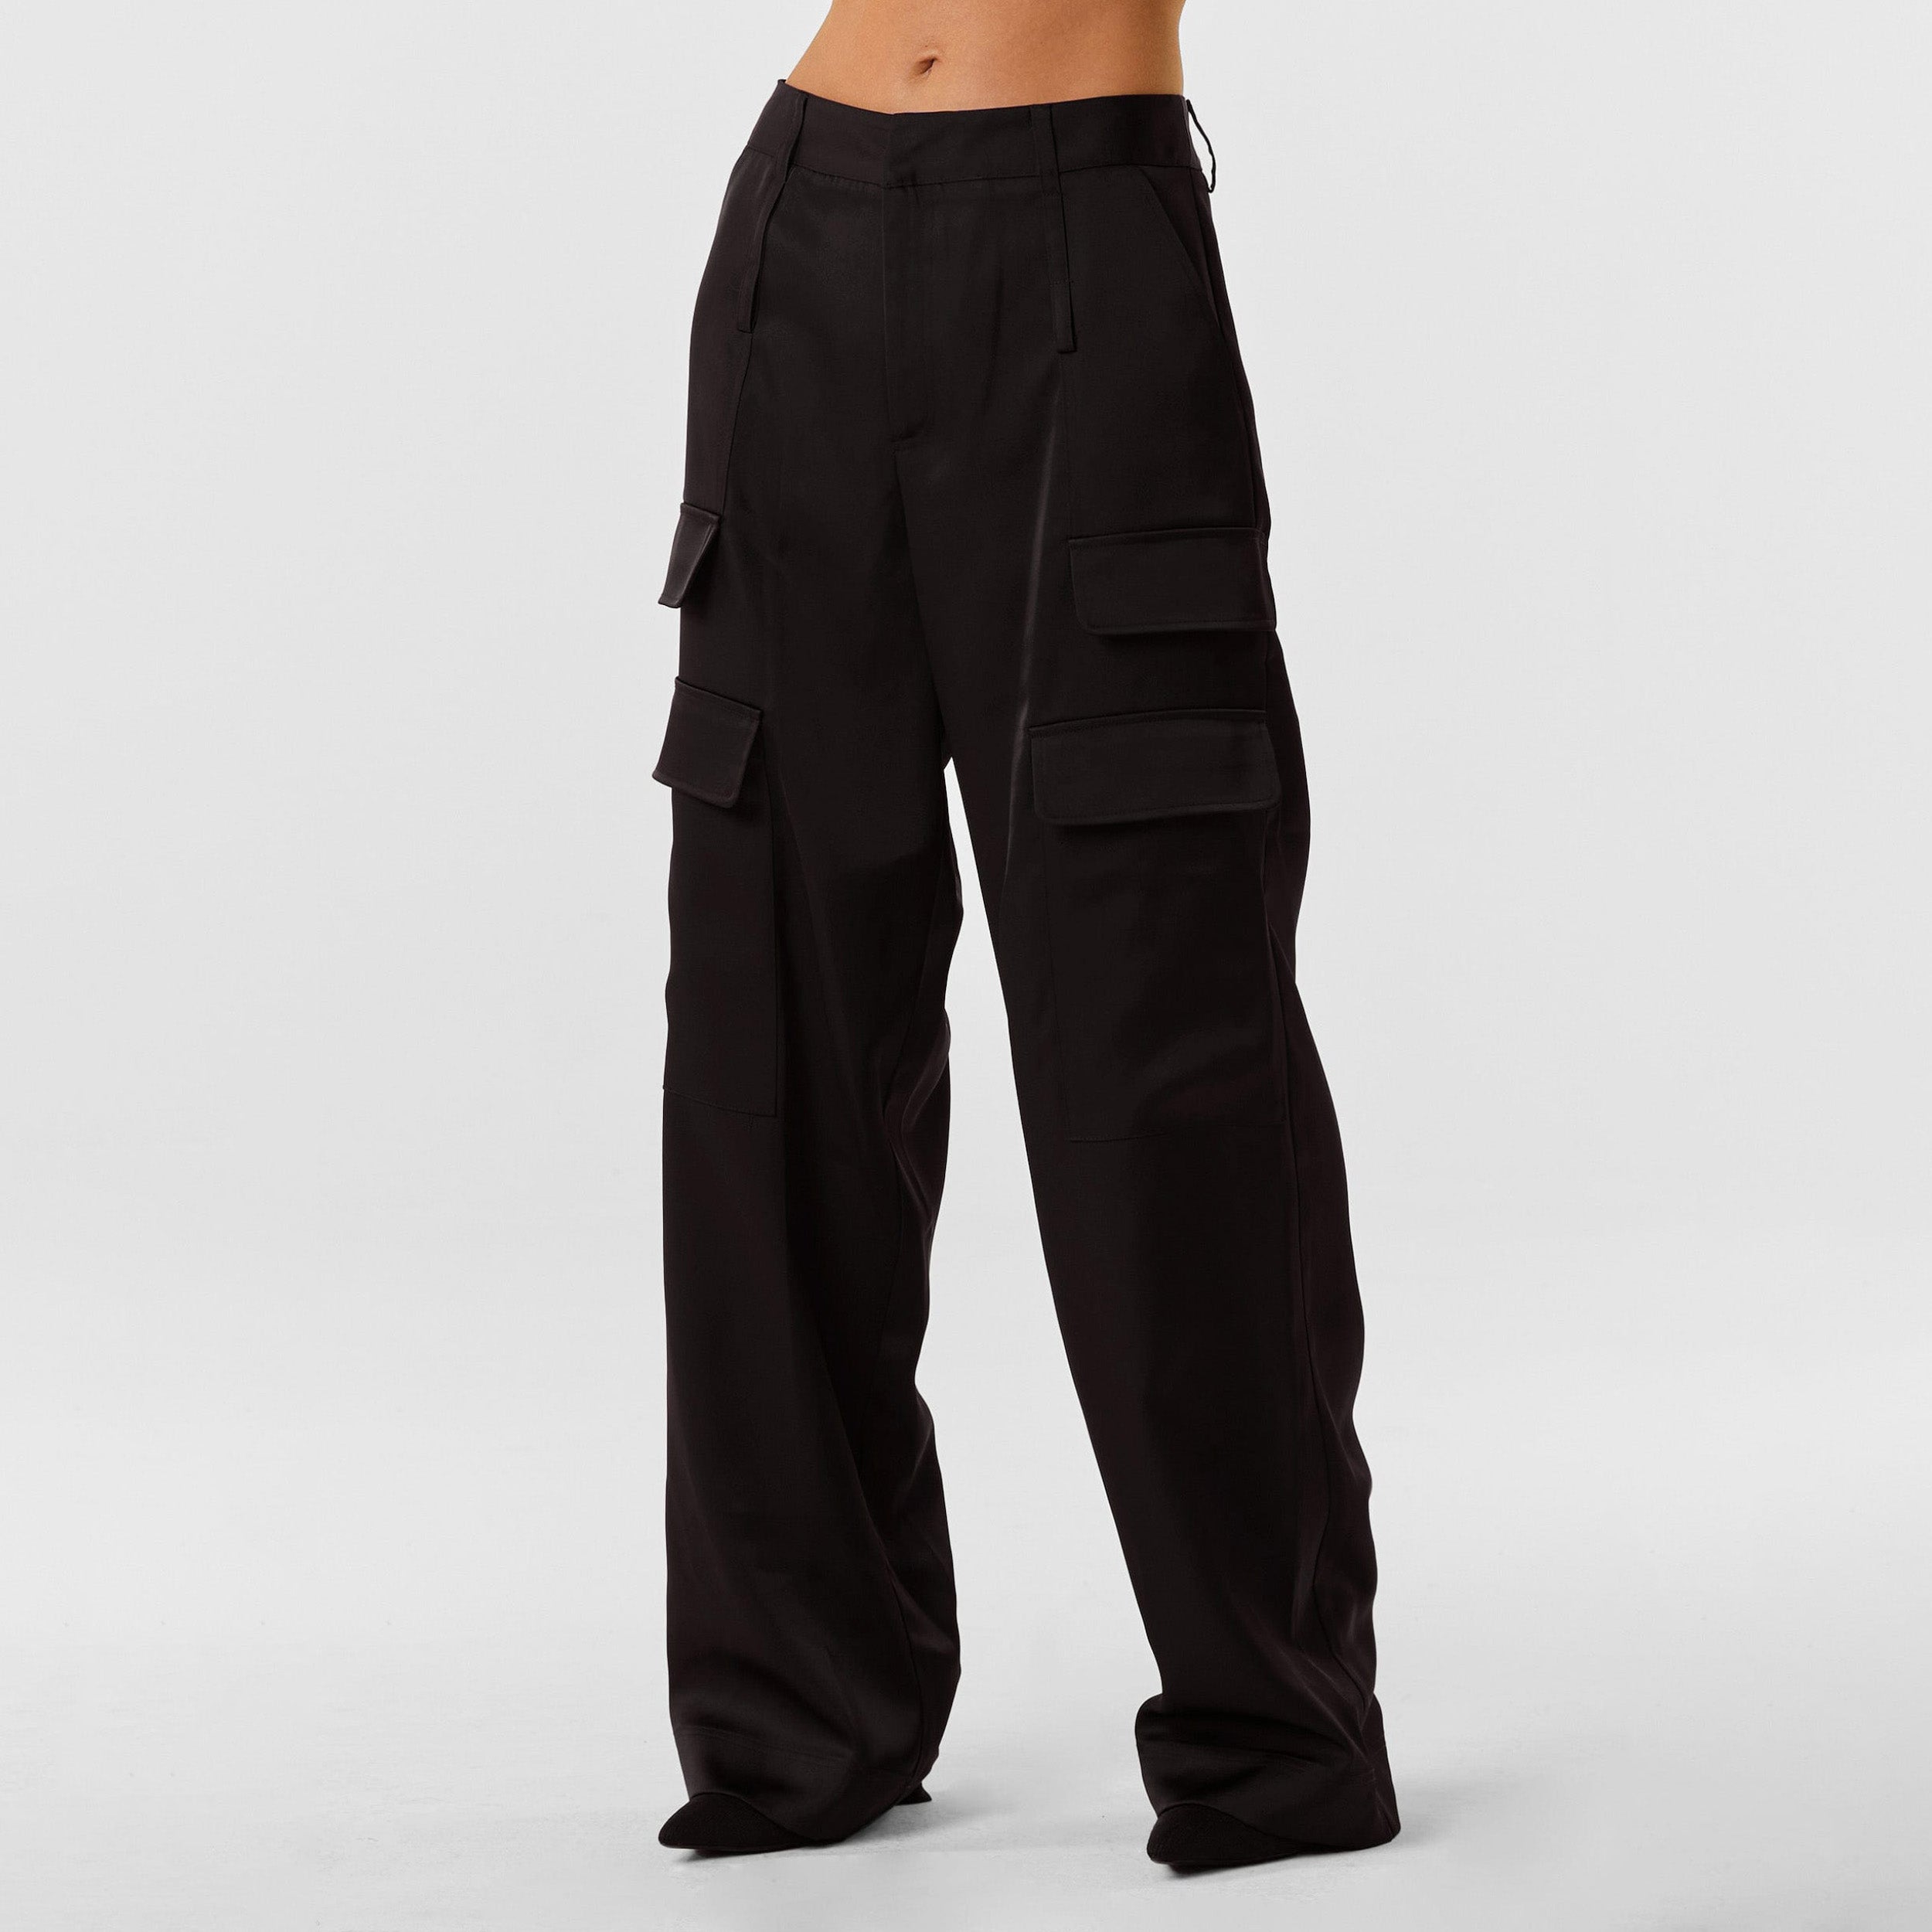 Front view of woman wearing Black Satin Milan Pant features Mid-rise with side pockets and cargo detail. Luxurious and structured satin-like fabric. 